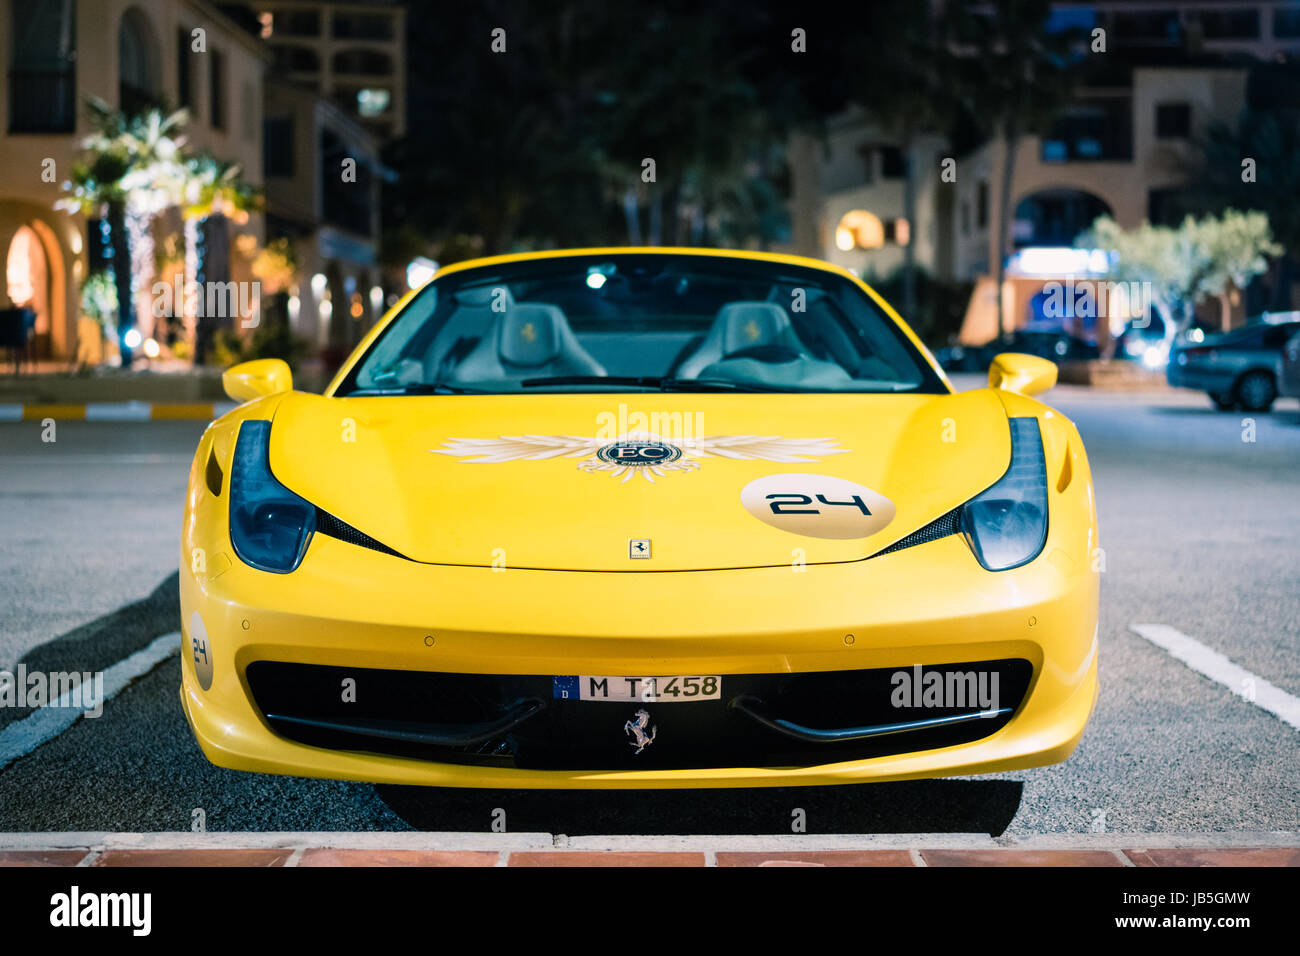 Yellow Ferrari parked outside during night time in California in the harbor of a little town Stock Photo